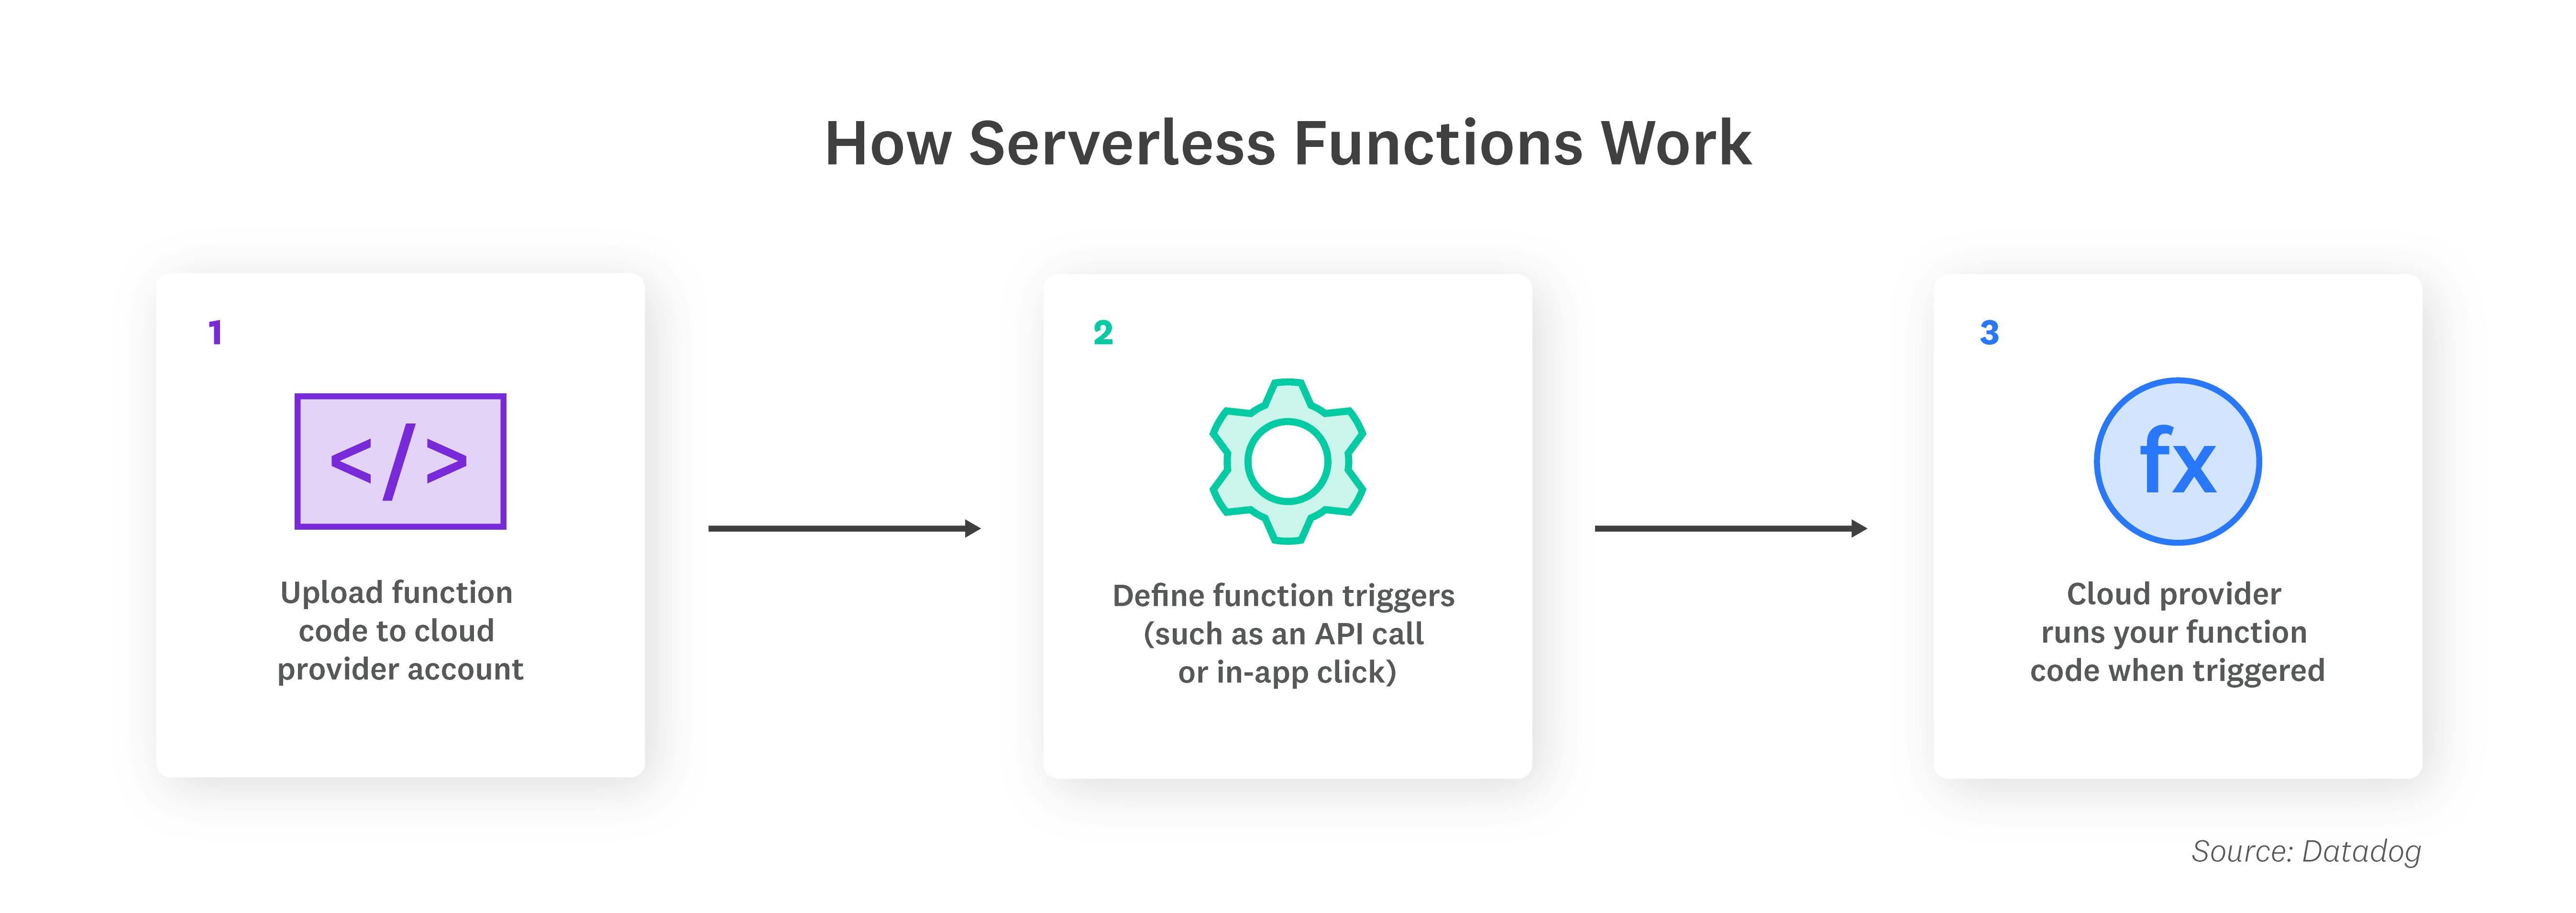 Function as a Service (FaaS), a popular type of serverless architecture, allows developers to focus on writing application code.